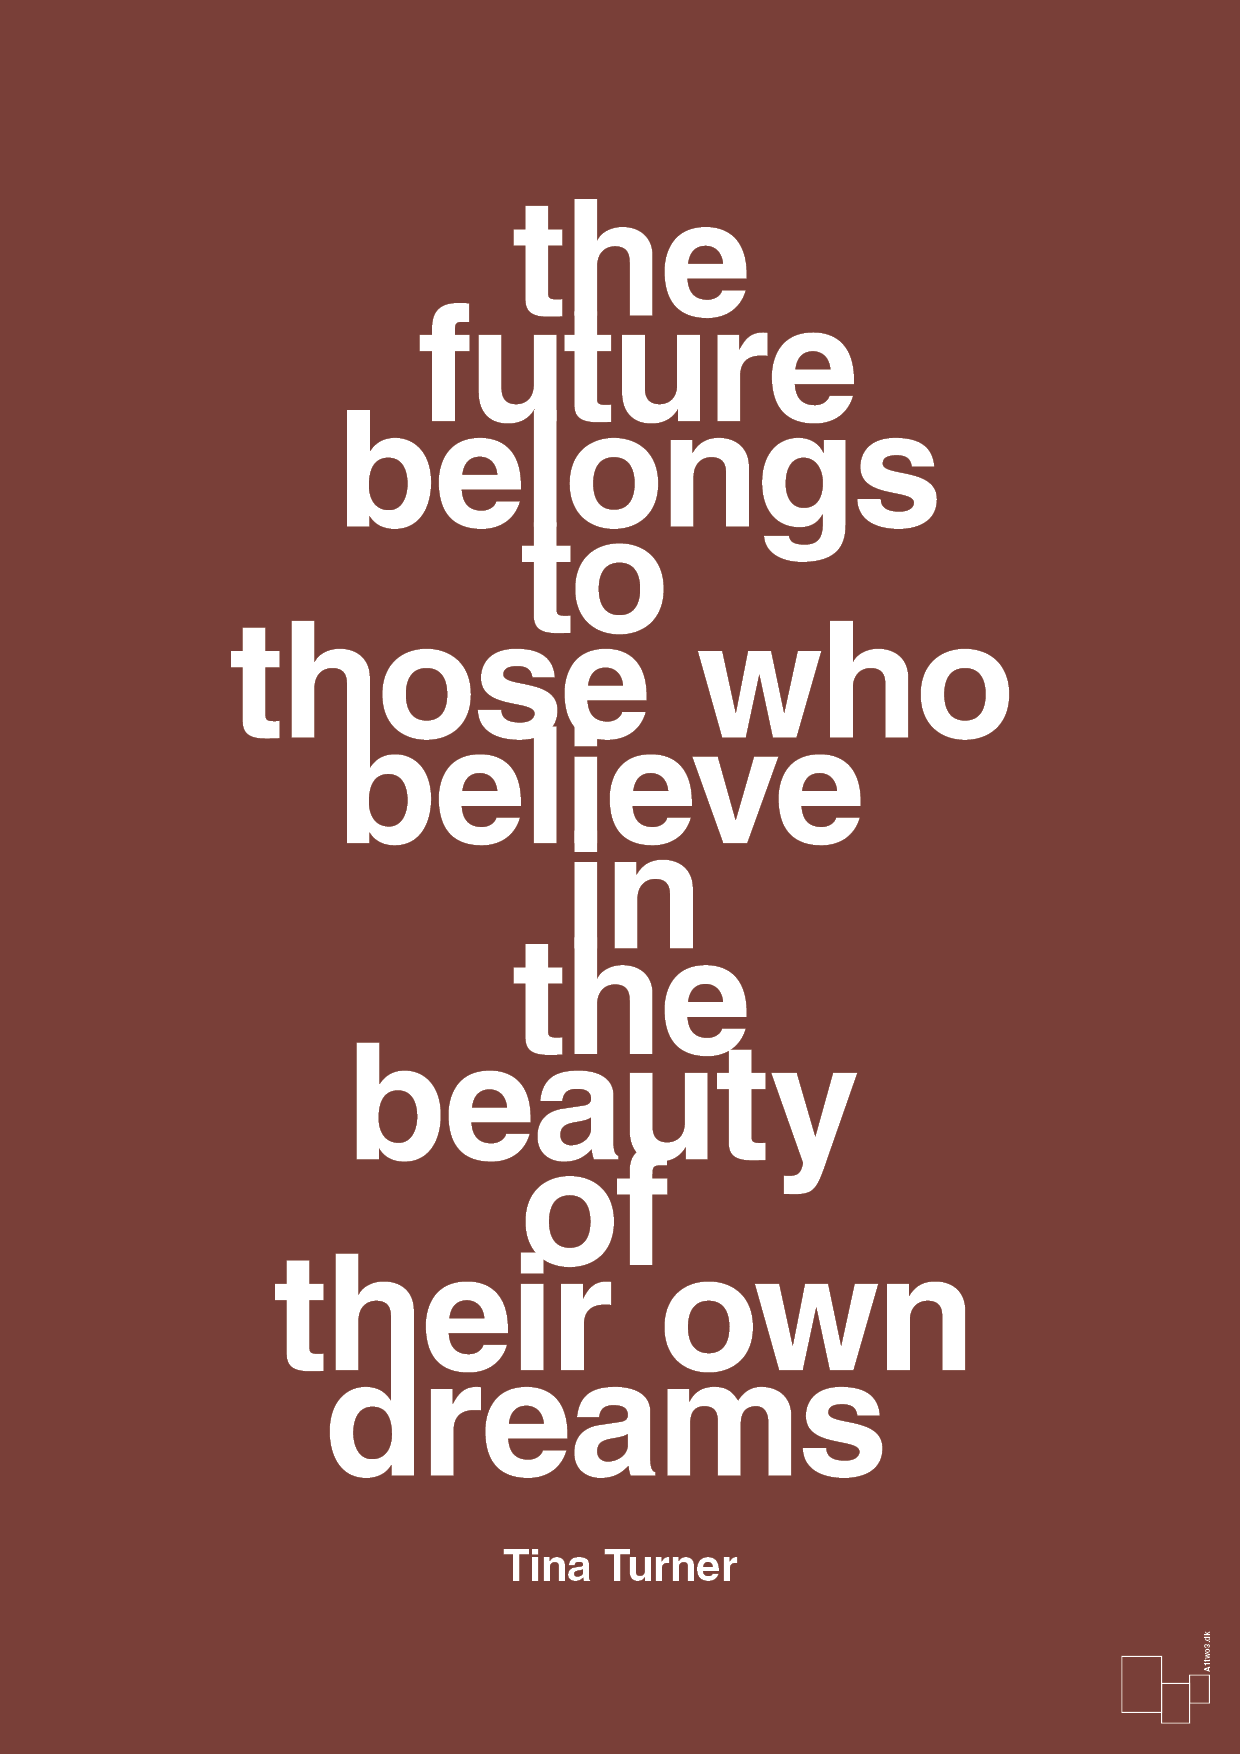 the future belongs to those who believe in the beauty of their own dreams - Plakat med Citater i Red Pepper